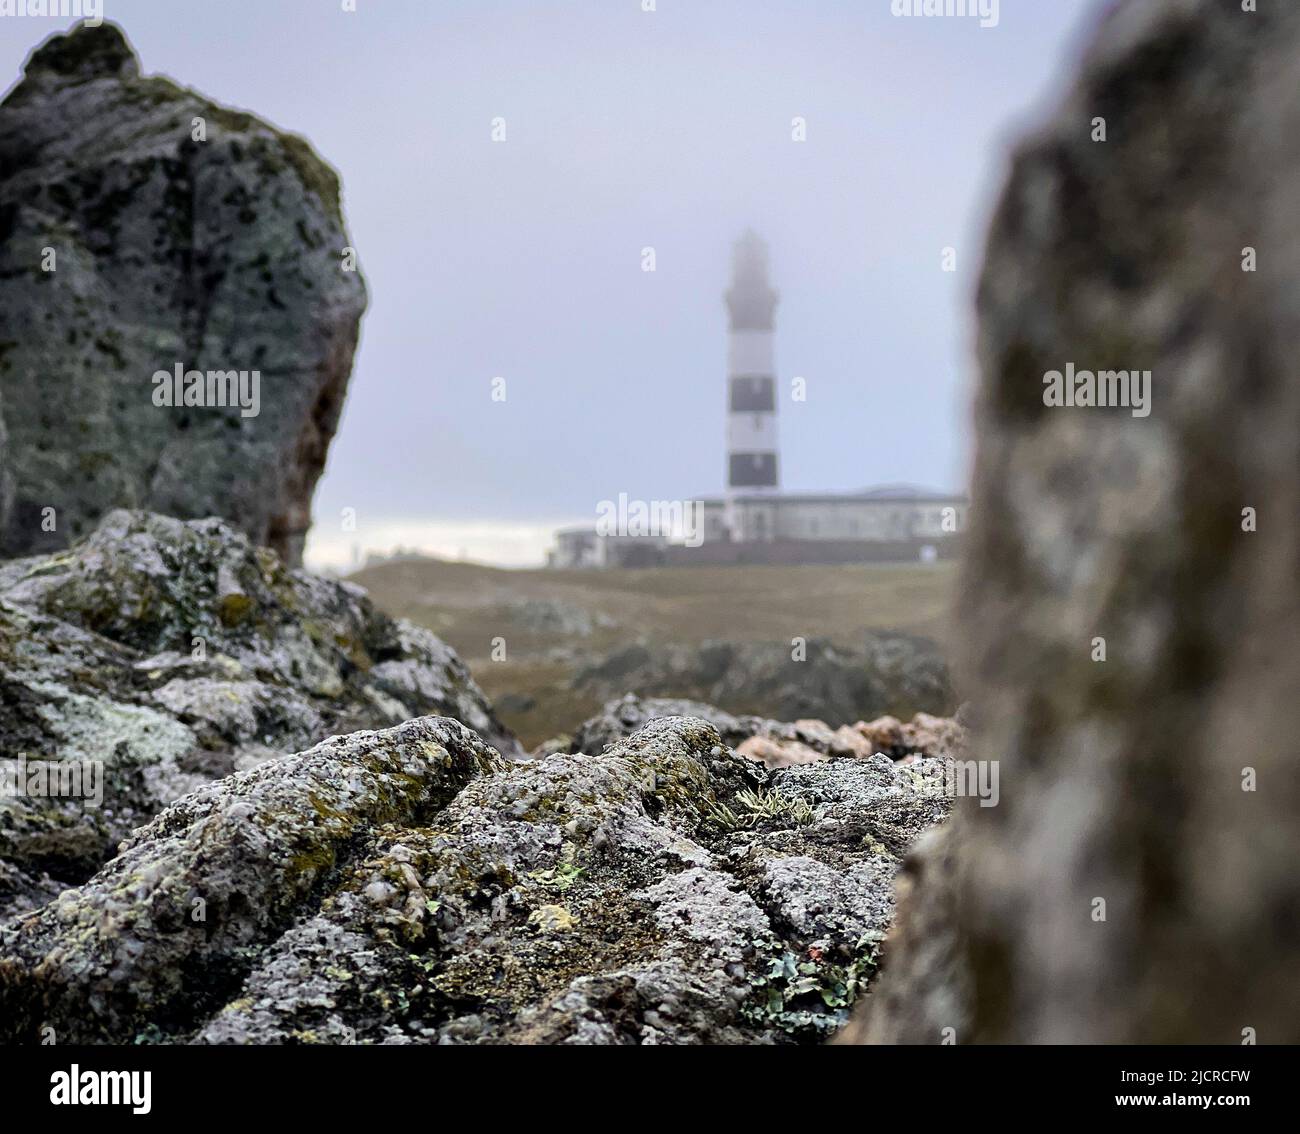 Ushan countryside scenery with Creach lighthouse on background, Brittany, France Stock Photo